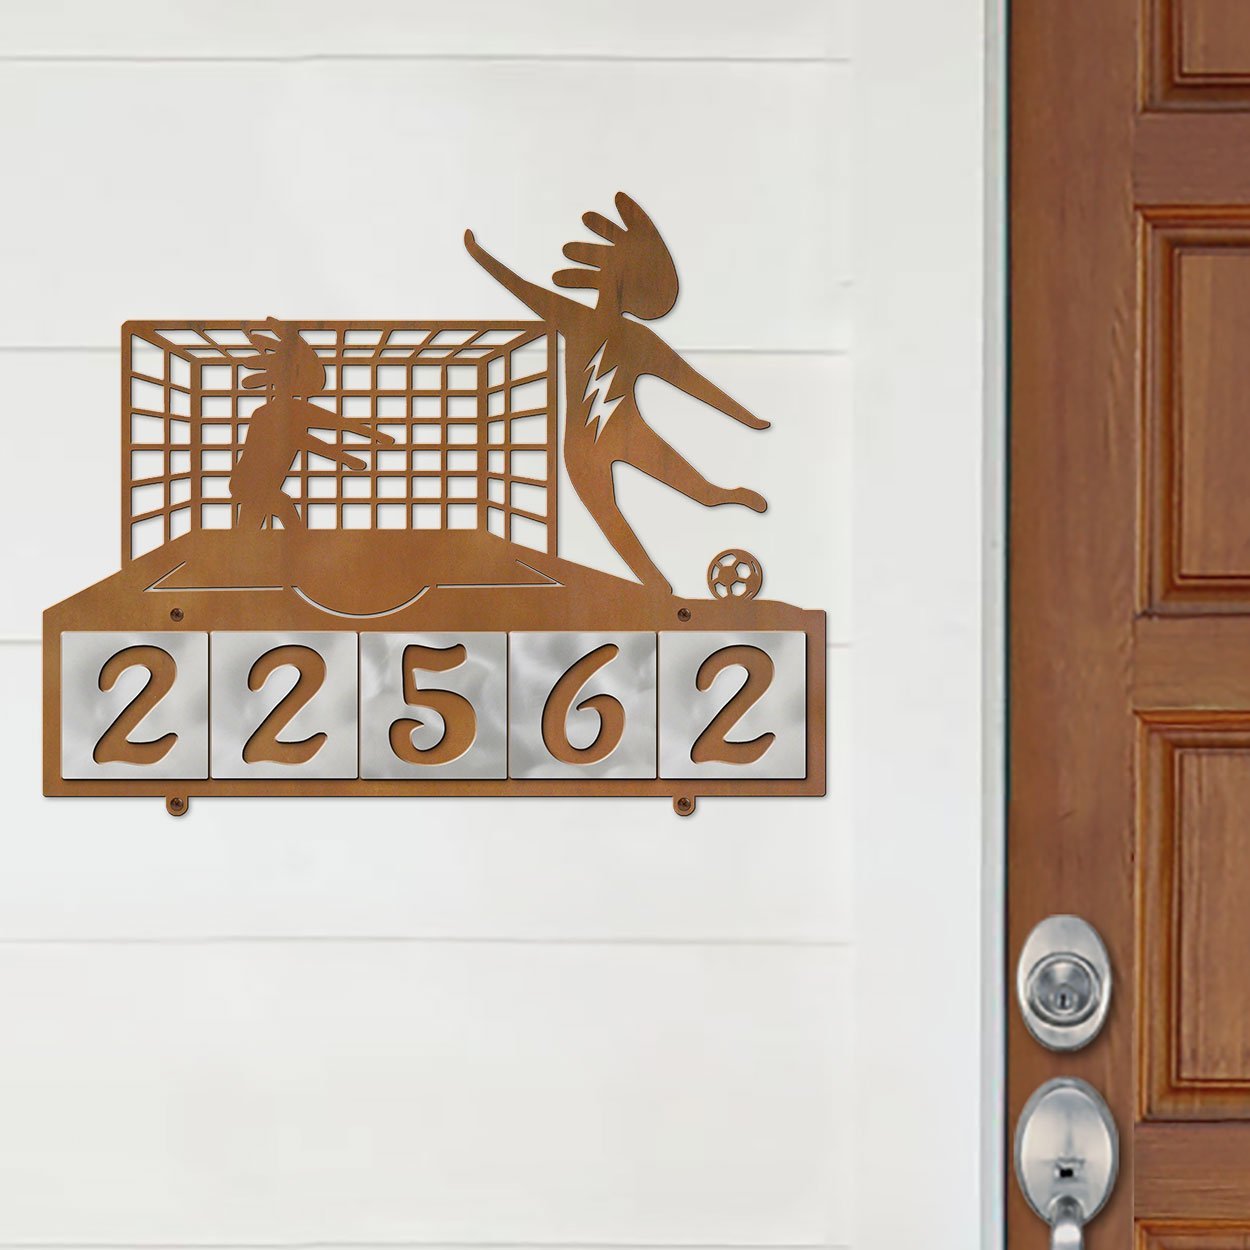 609195 - XL Kokopelli Soccer Player and Goalie Design 5-Digit Horizontal 6in Tile Outdoor House Numbers